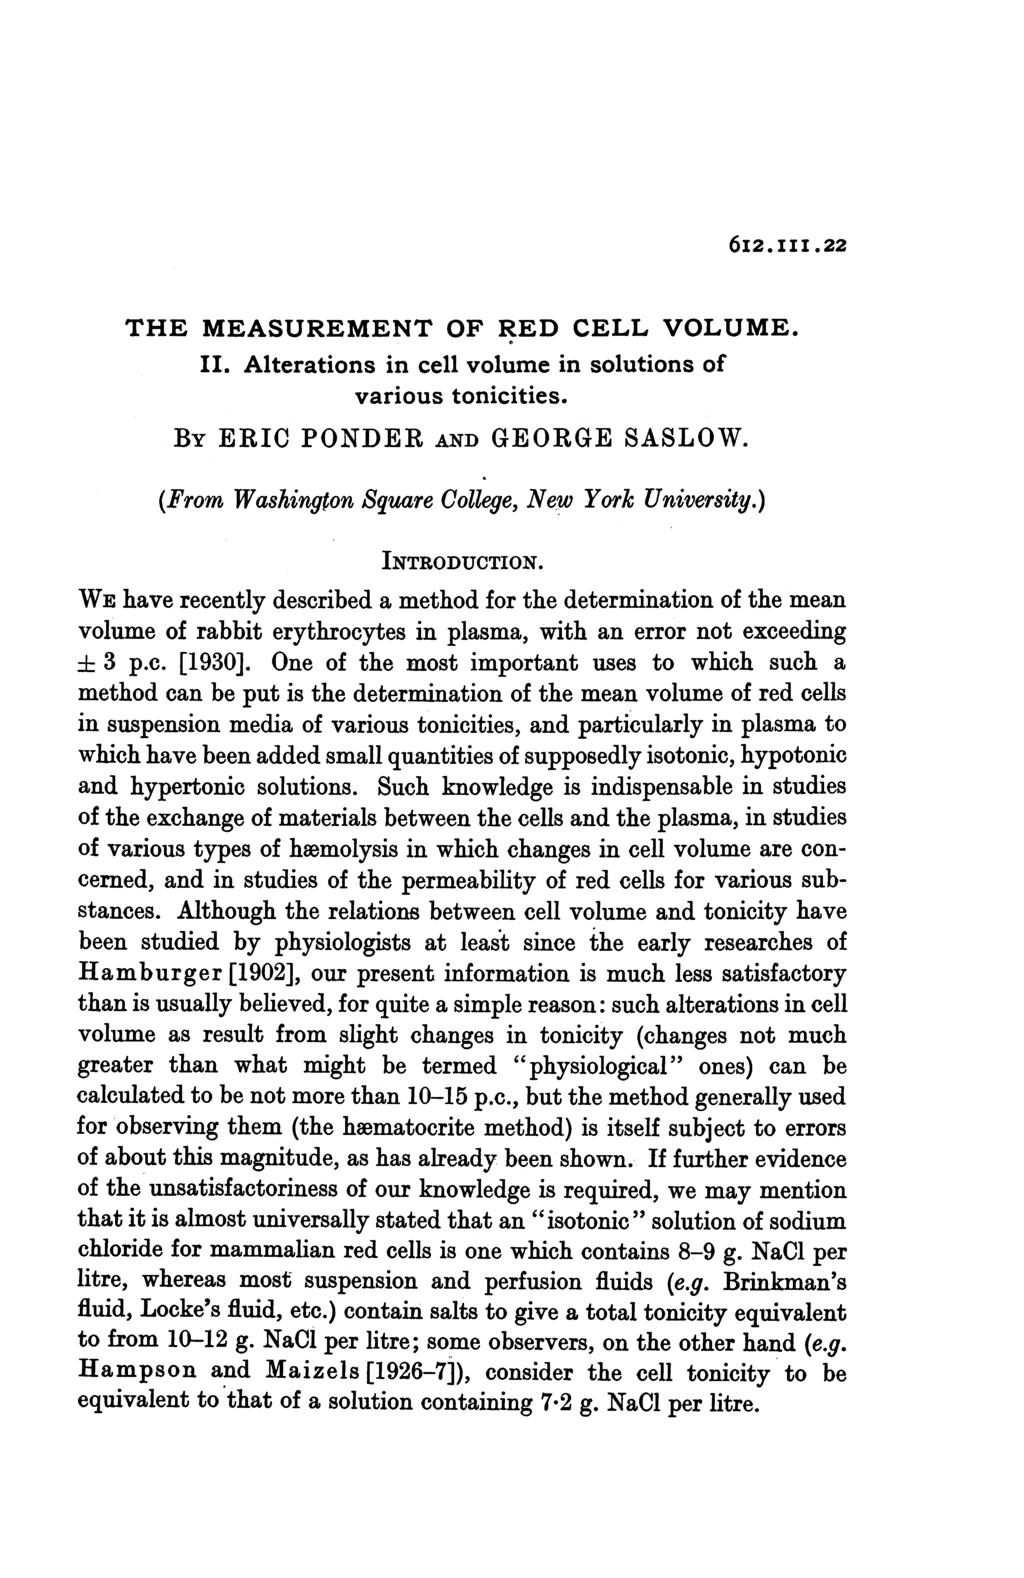 6I2.III.22 THE MEASUREMENT OF RED CELL VOLUME. II. Alterations in cell volume in solutions of various tonicities. BY ERIC PONDER AND GEORGE SASLOW.